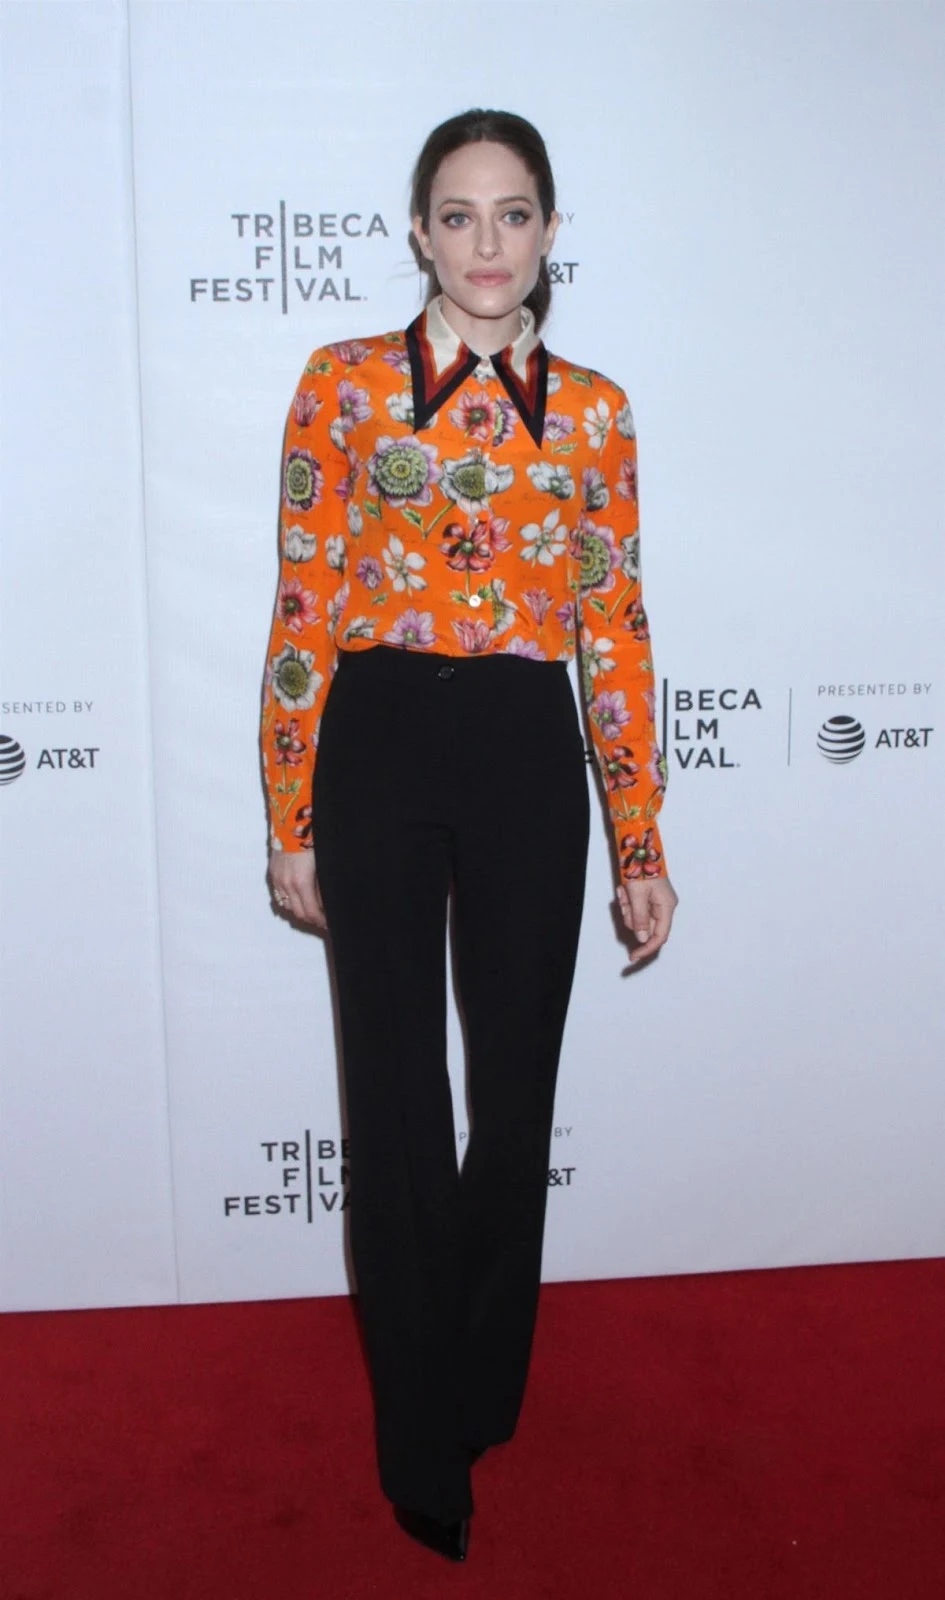 American Actress Carly Chaikin at Tribeca Film Festival